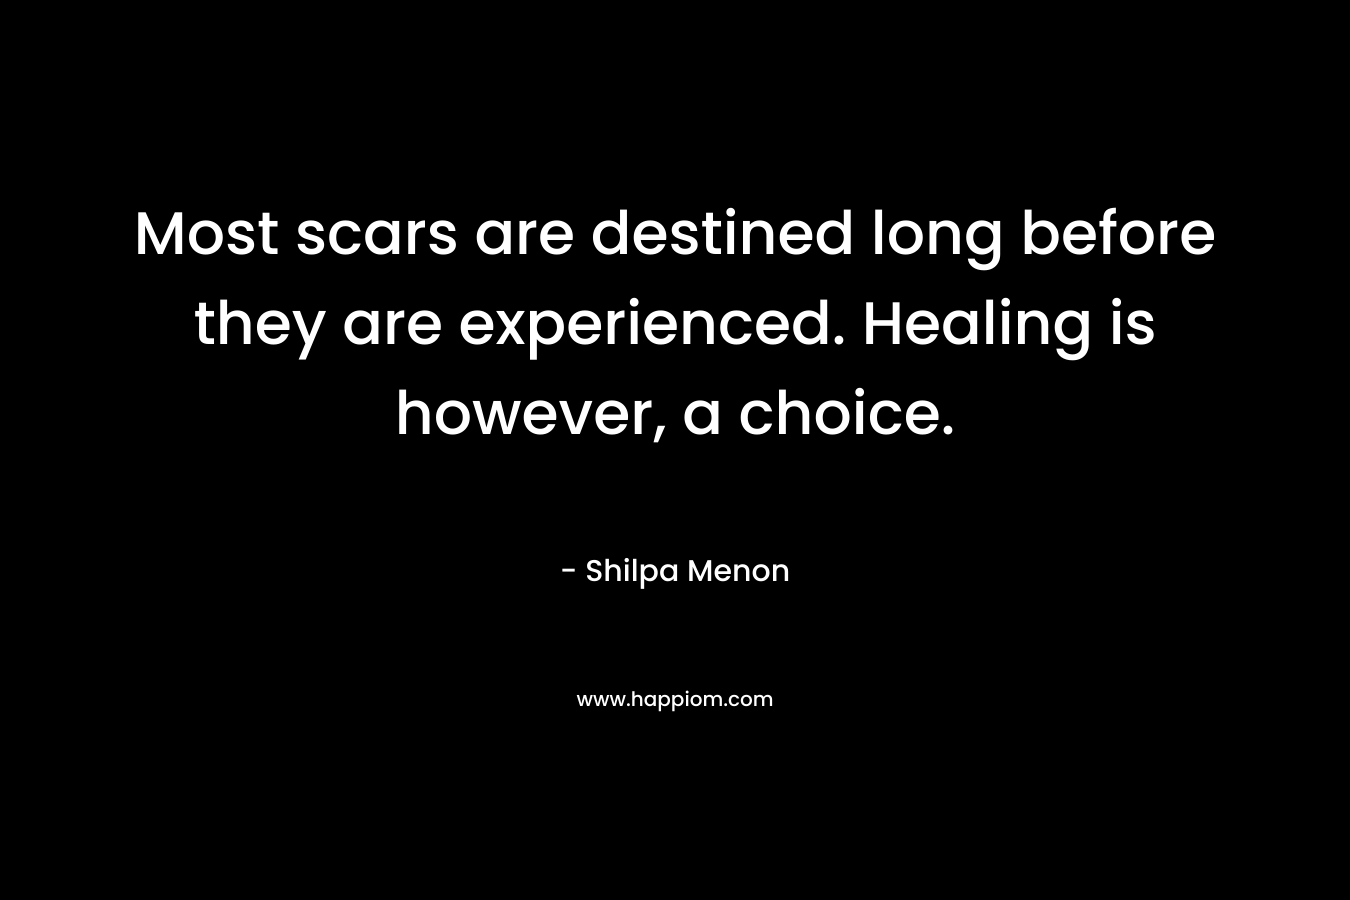 Most scars are destined long before they are experienced. Healing is however, a choice. – Shilpa Menon